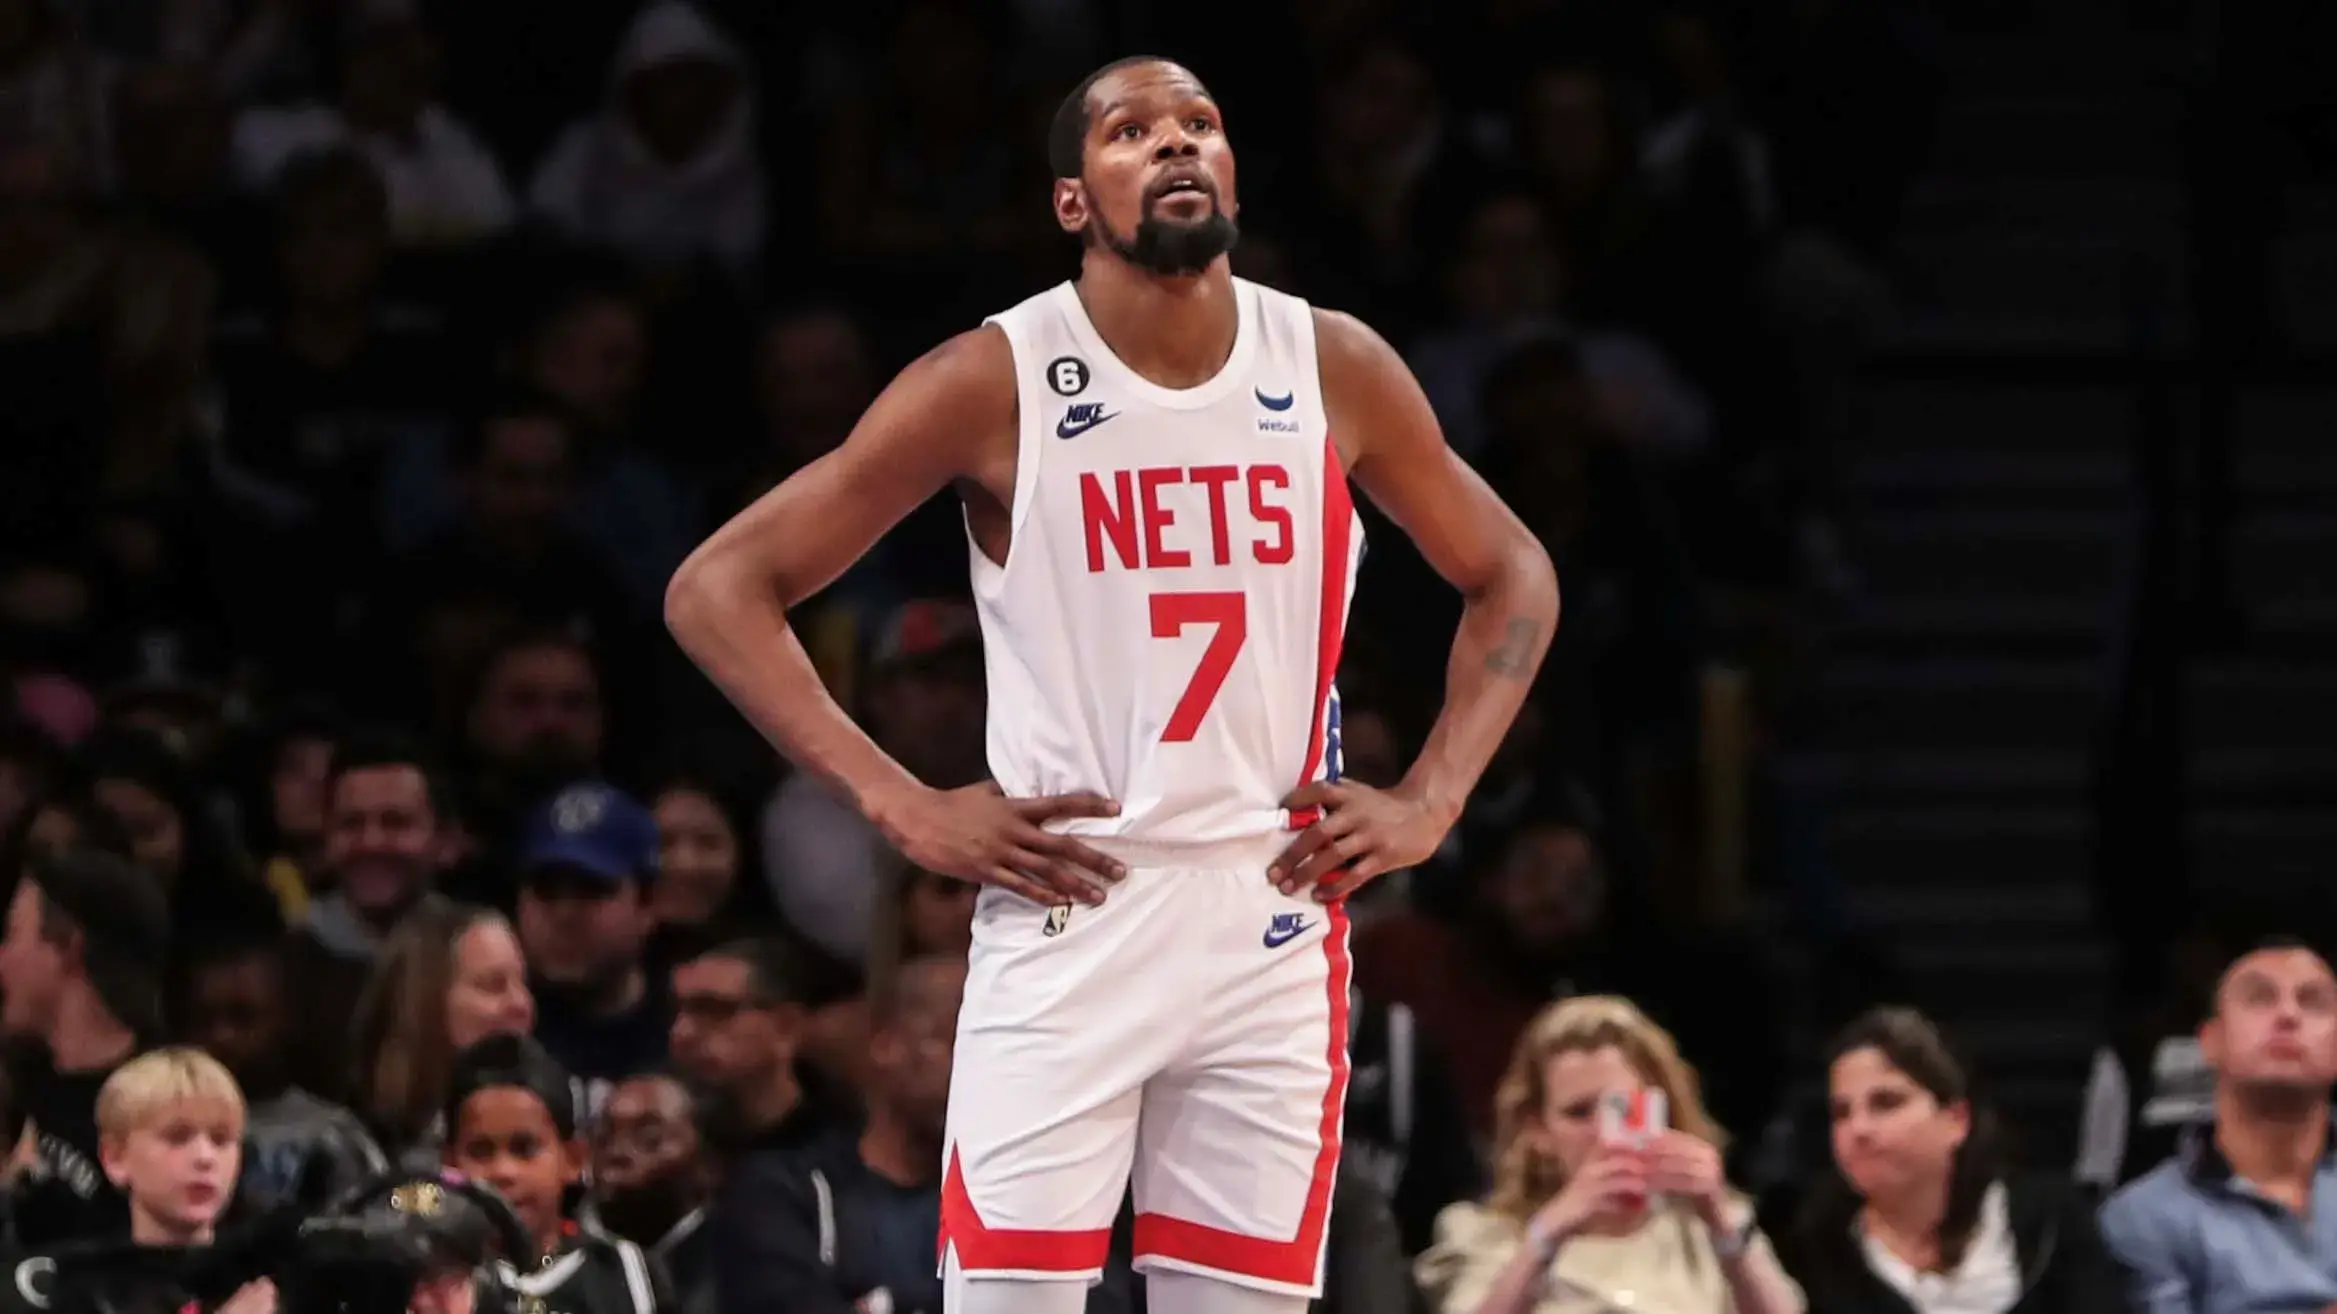 Oct 29, 2022; Brooklyn, New York, USA; Brooklyn Nets forward Kevin Durant (7) looks up at the scoreboard in the fourth quarter against the Indiana Pacers at Barclays Center. Mandatory Credit: Wendell Cruz-USA TODAY Sports / © Wendell Cruz-USA TODAY Sports